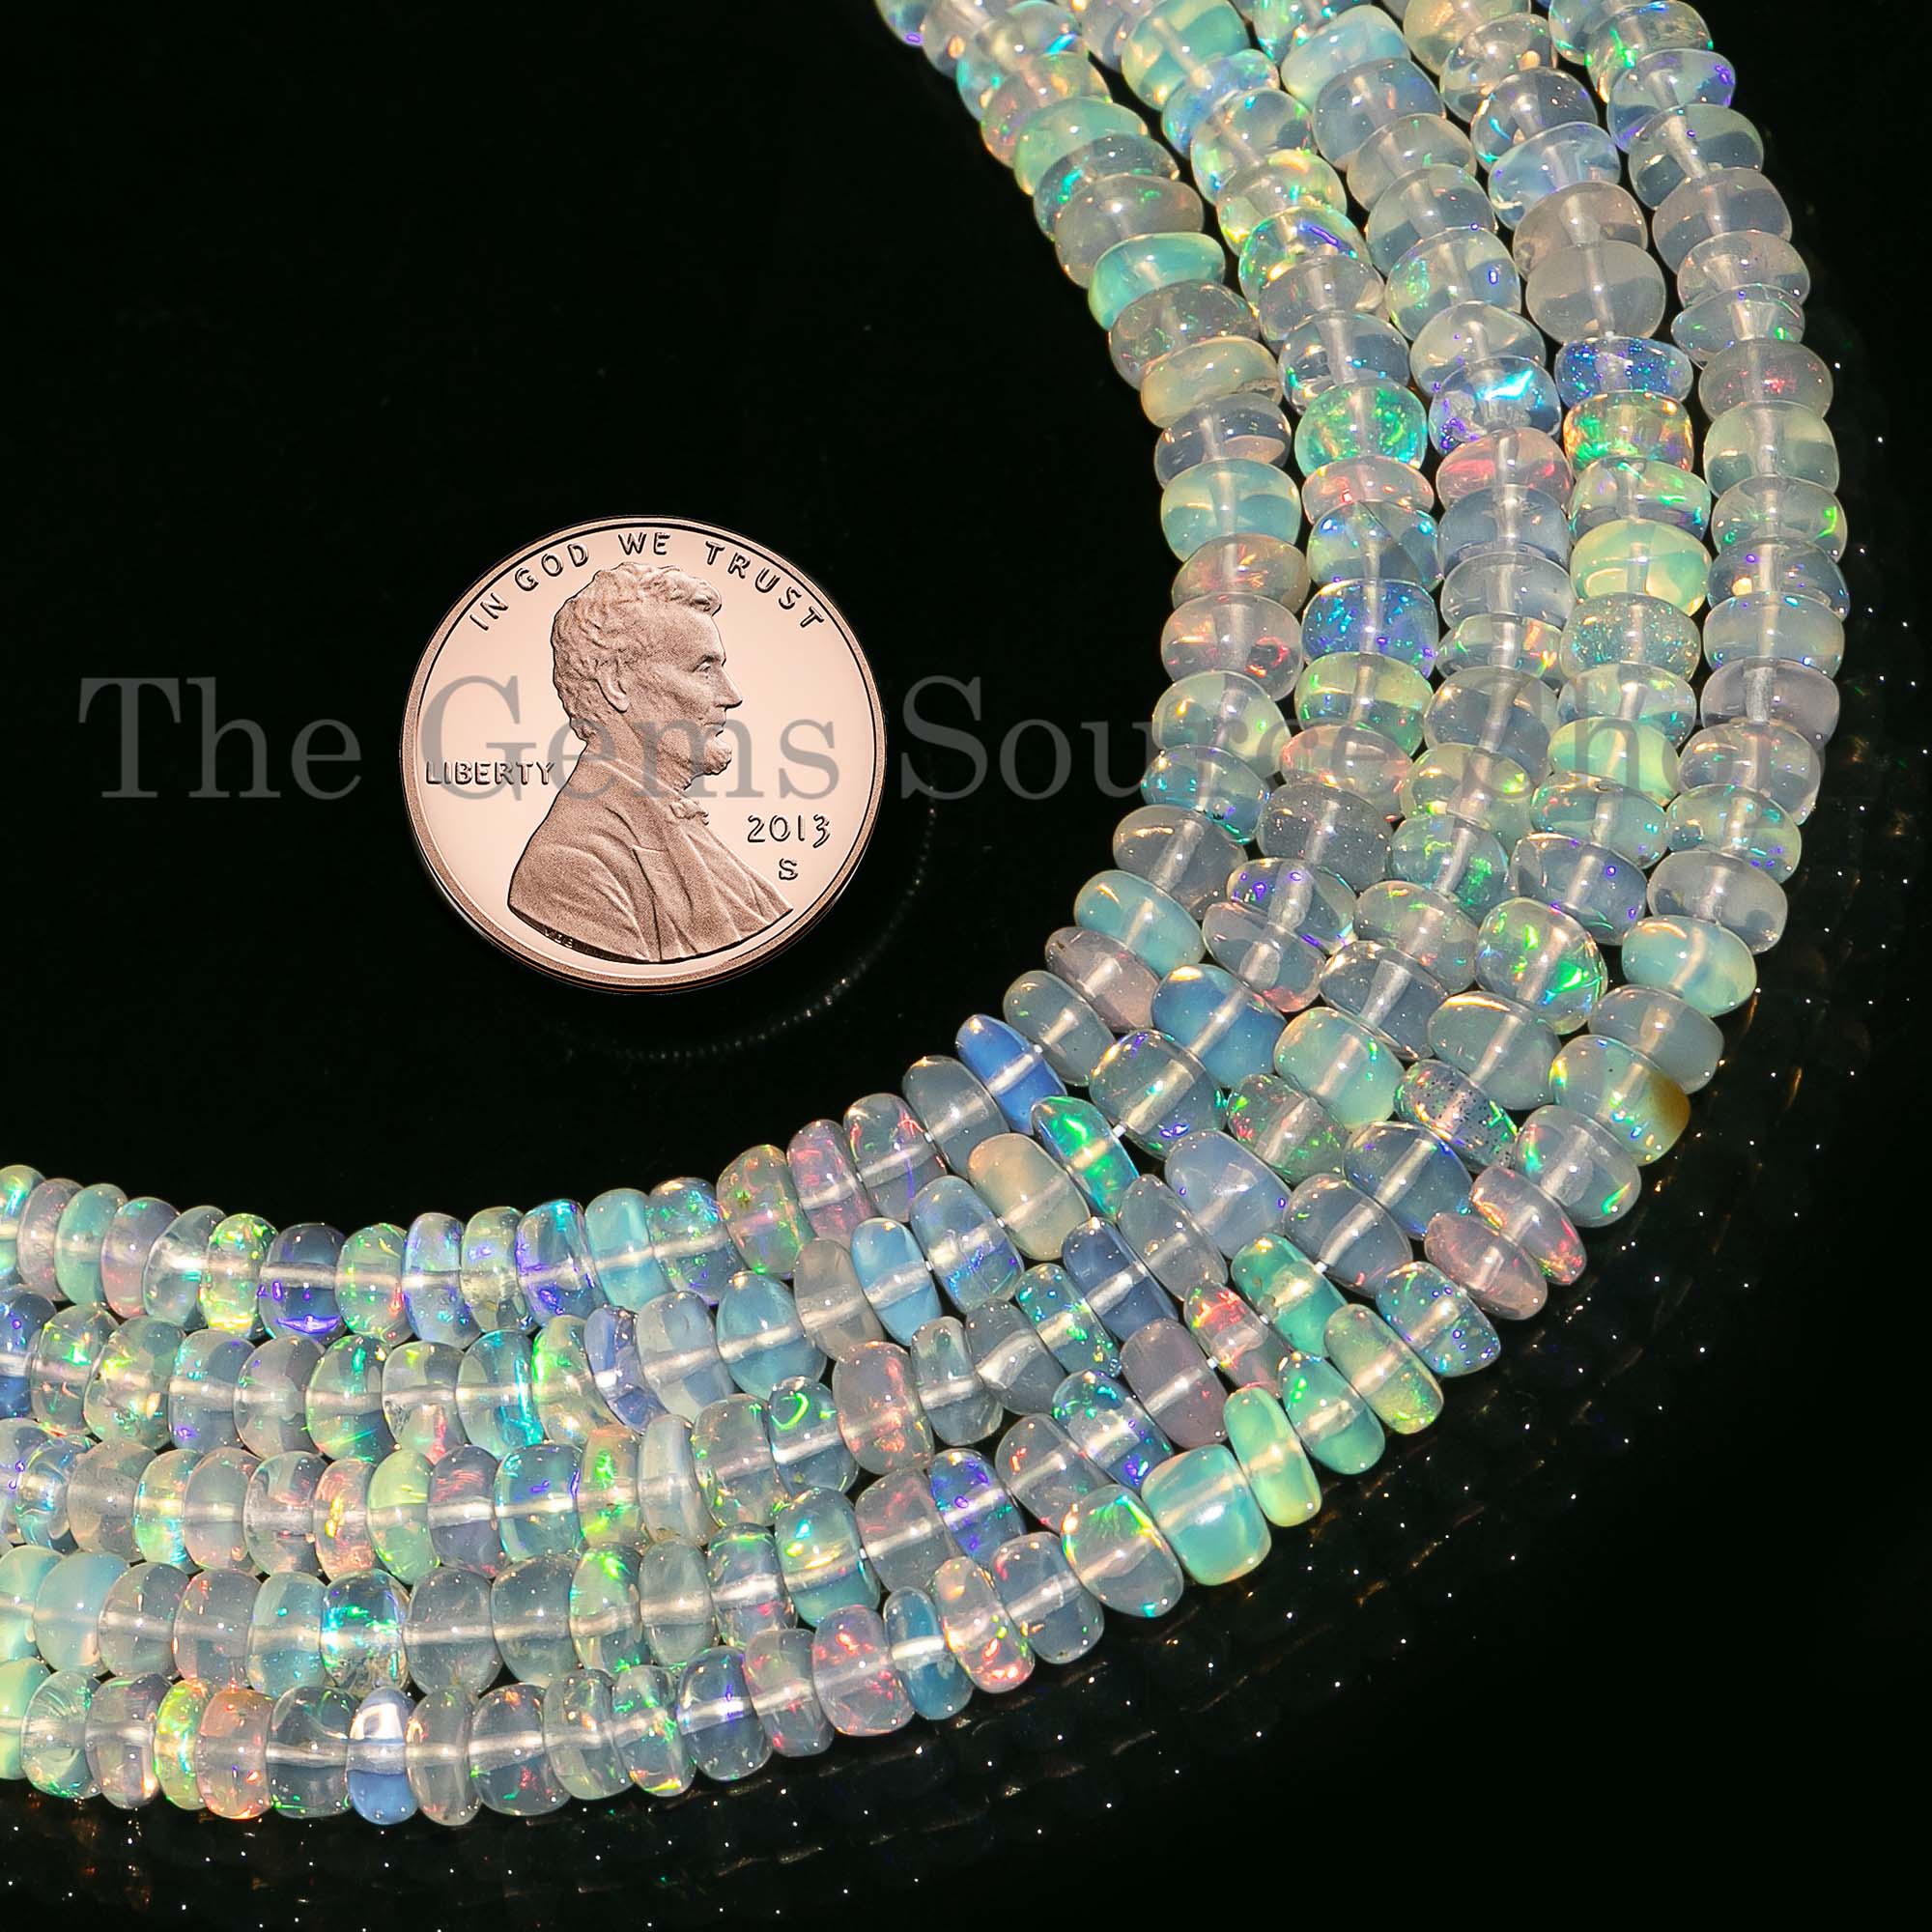 Natural Ethiopian Opal 4-5mm Smooth Rondelle, Fire Opal Beads, Opal Smooth Beads, Opal Rondelle Beads, Strand Beads